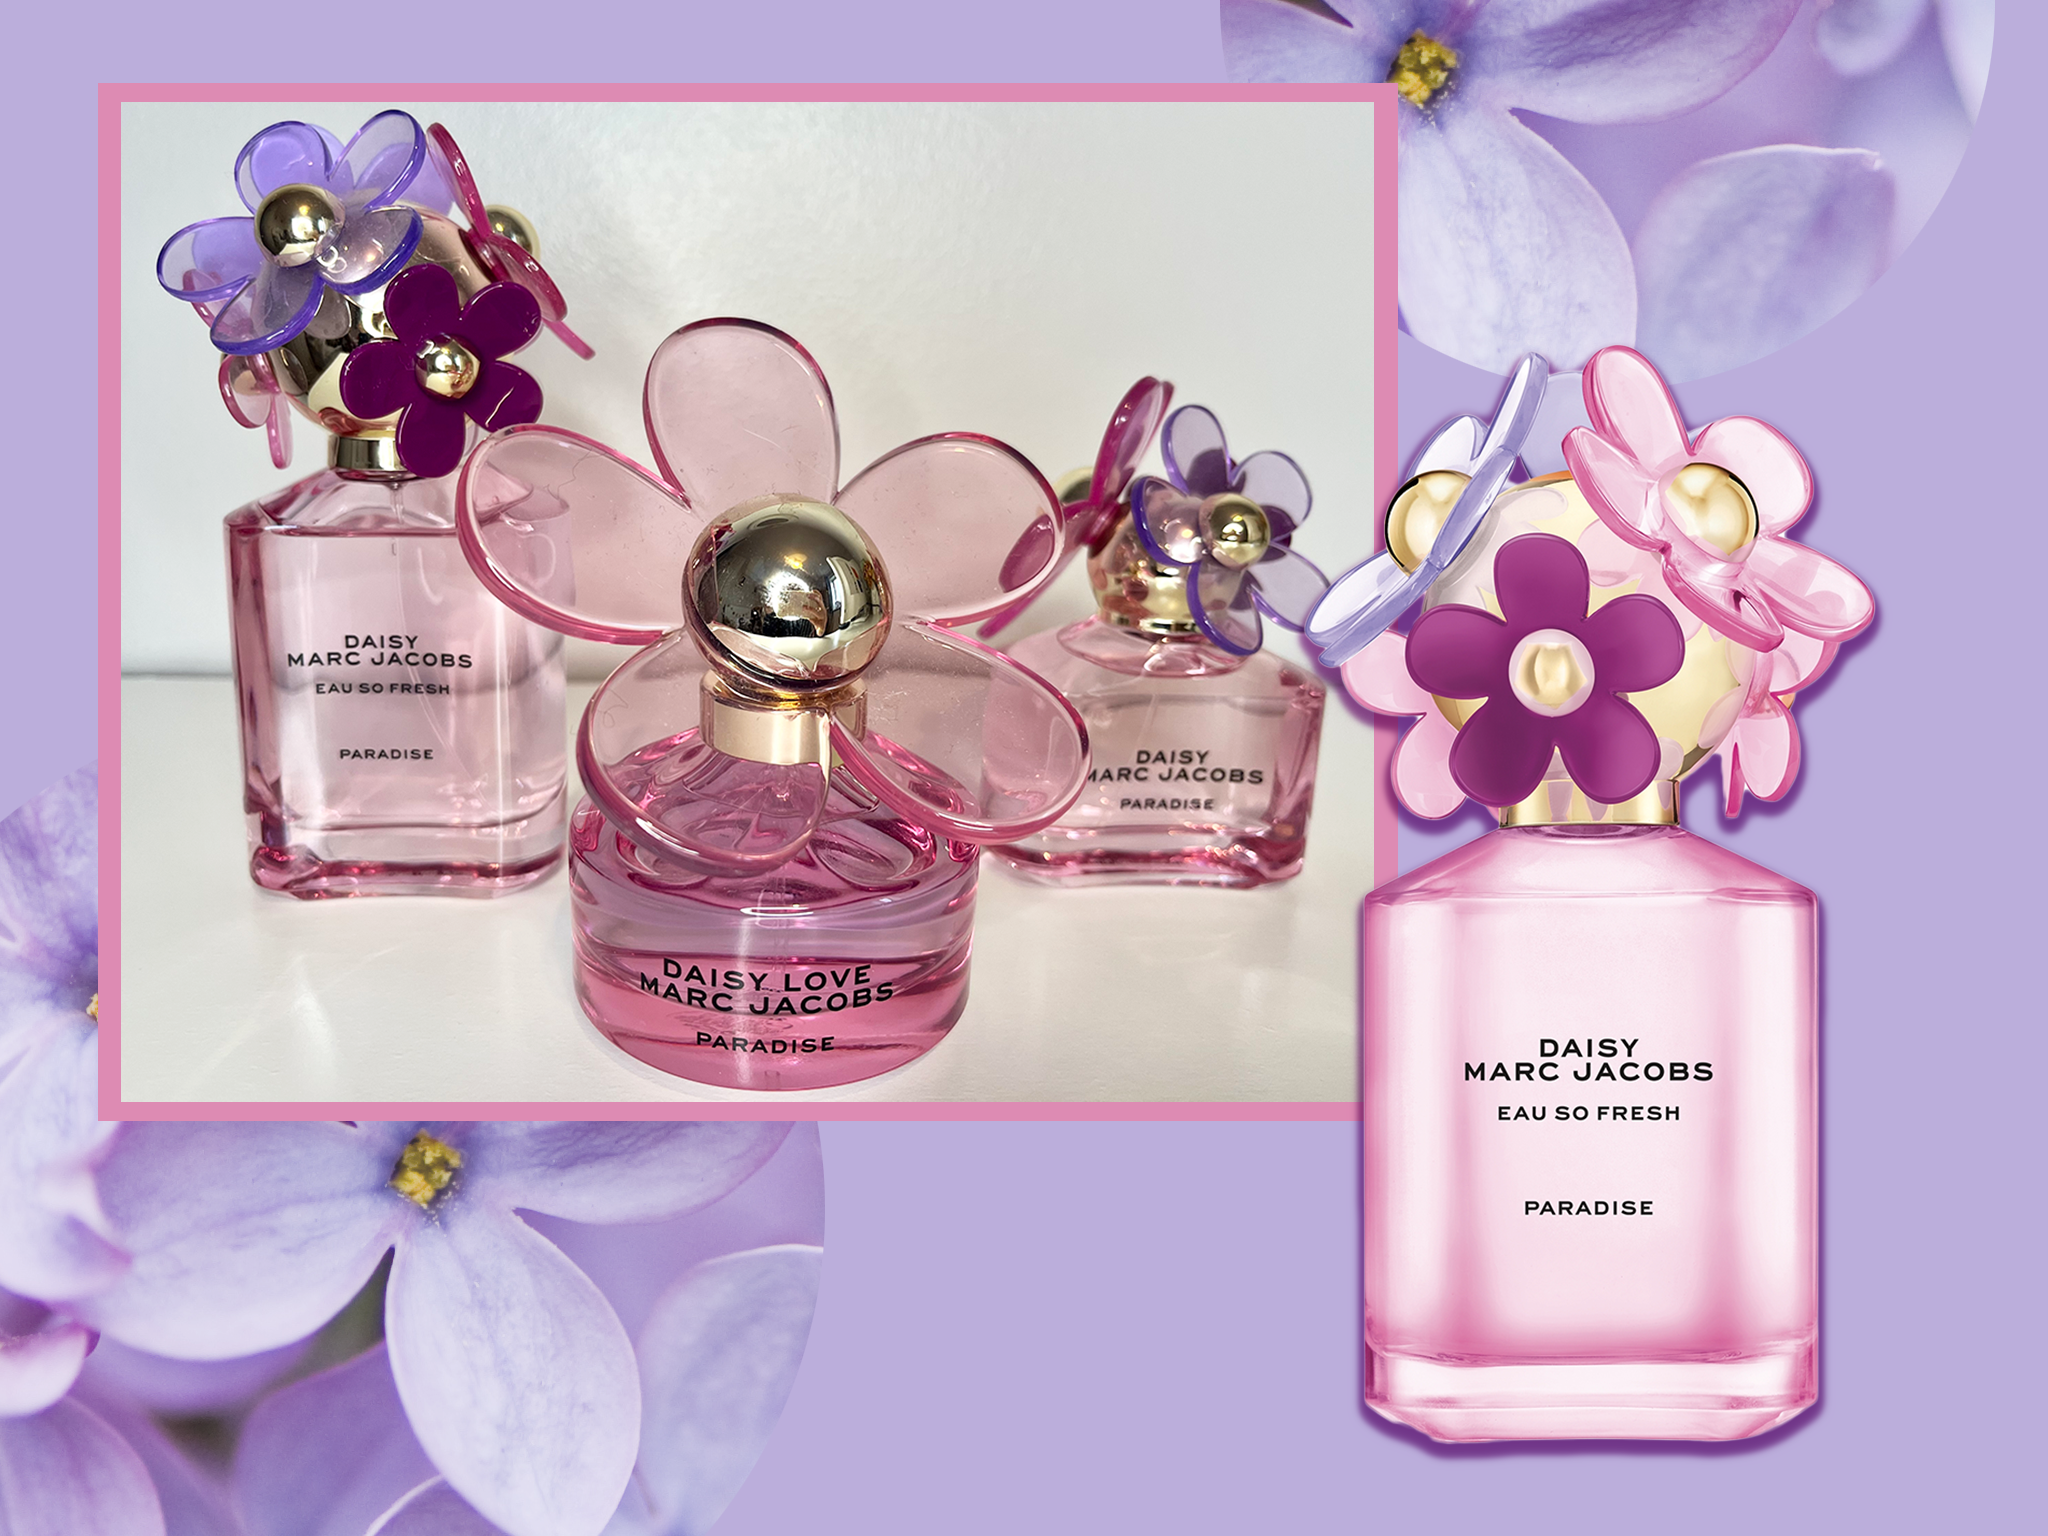 The trio features notes of poppy, oak, lavender and pink pepper